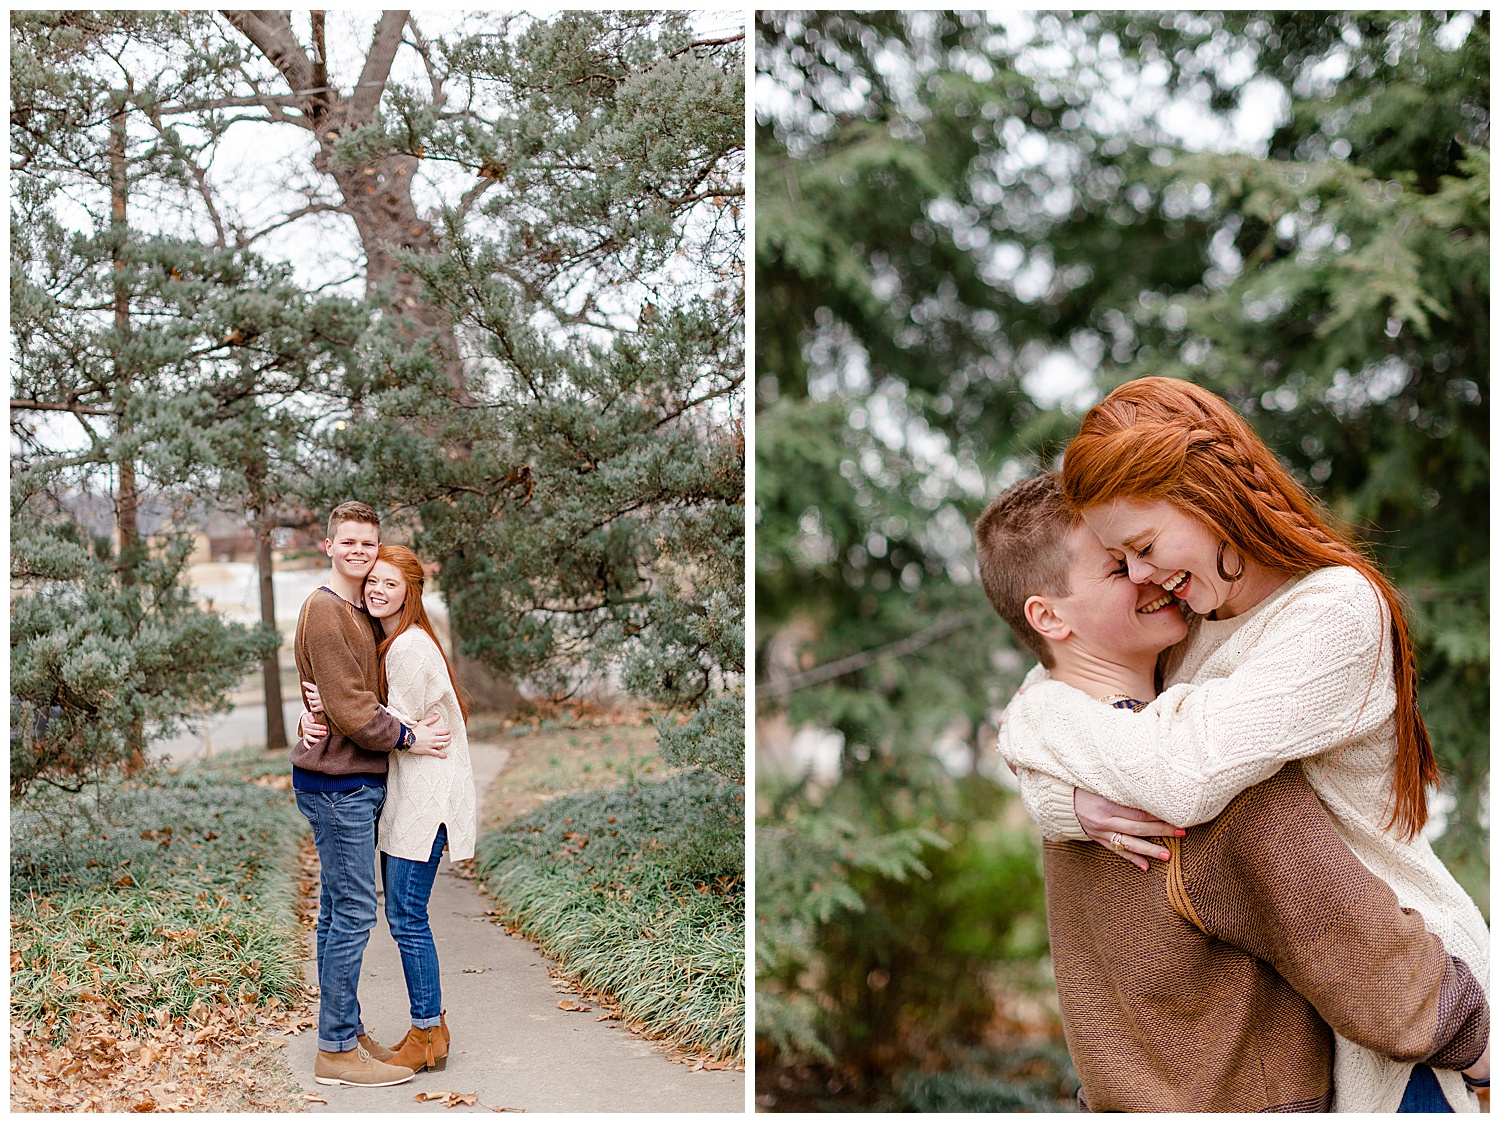 A couple taking engagement photos in the evergreen trees at woodward park.